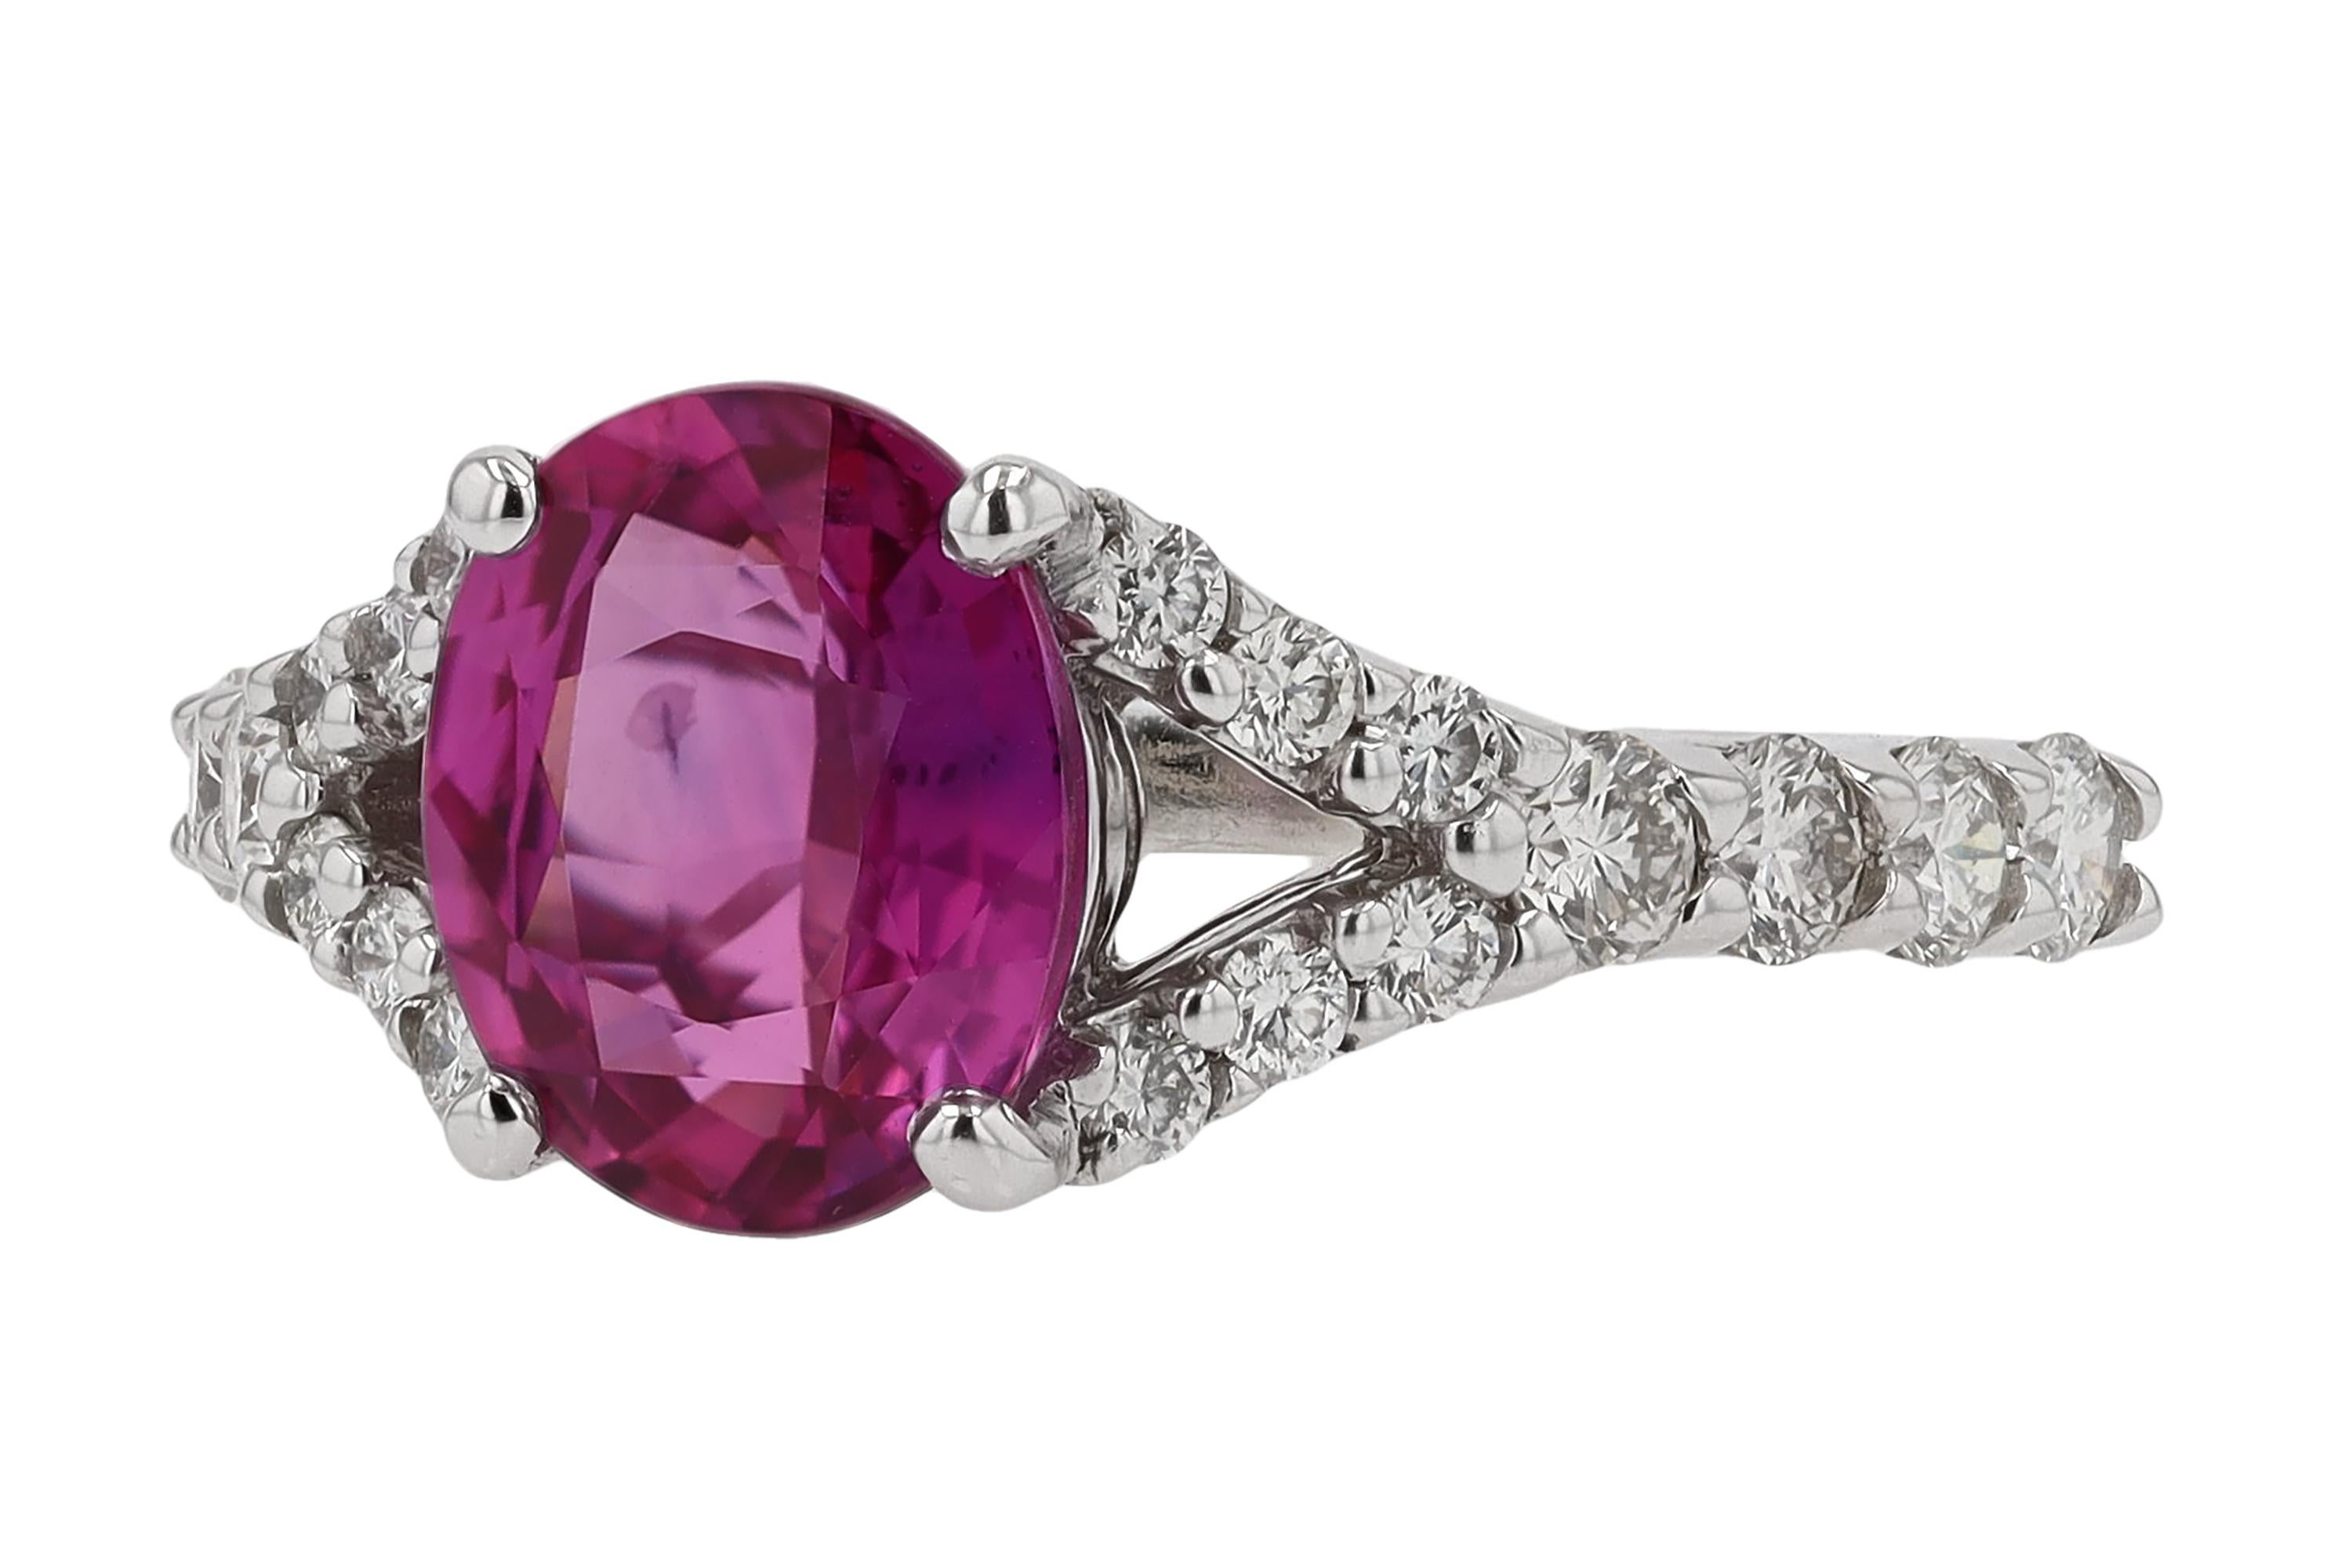 Oval Cut Vivid Pink Sapphire Gemstone V Band Engagement Ring For Sale